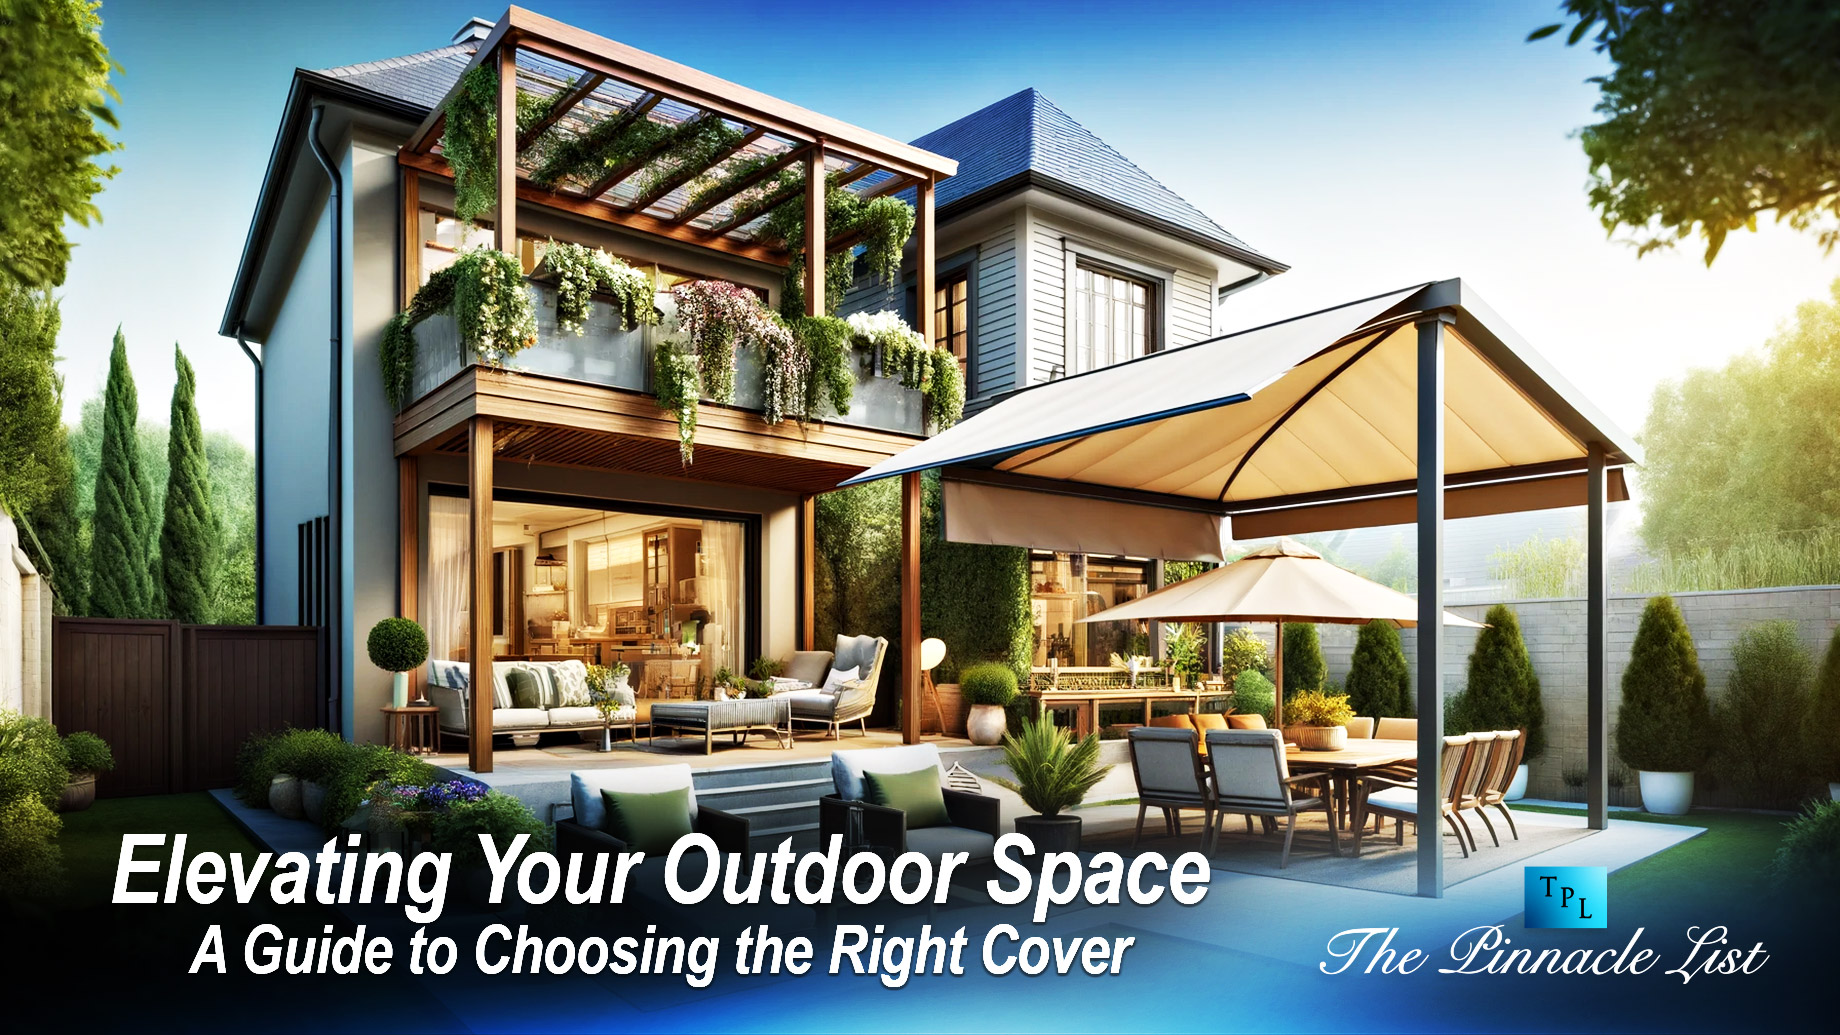 Elevating Your Outdoor Space: A Guide to Choosing the Right Cover